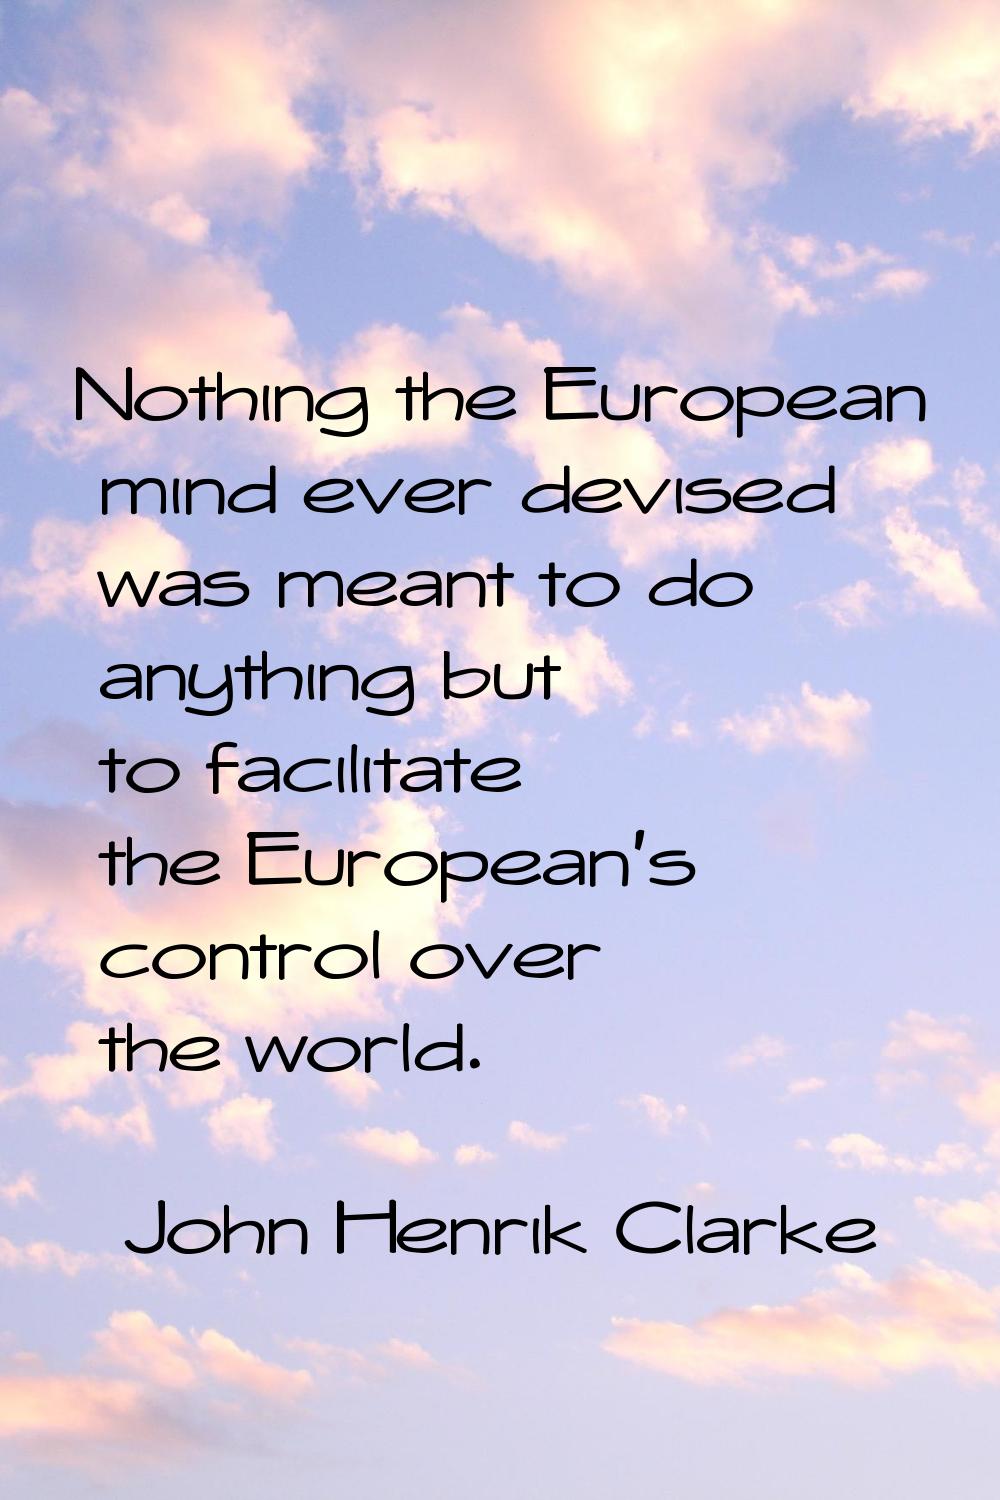 Nothing the European mind ever devised was meant to do anything but to facilitate the European's co